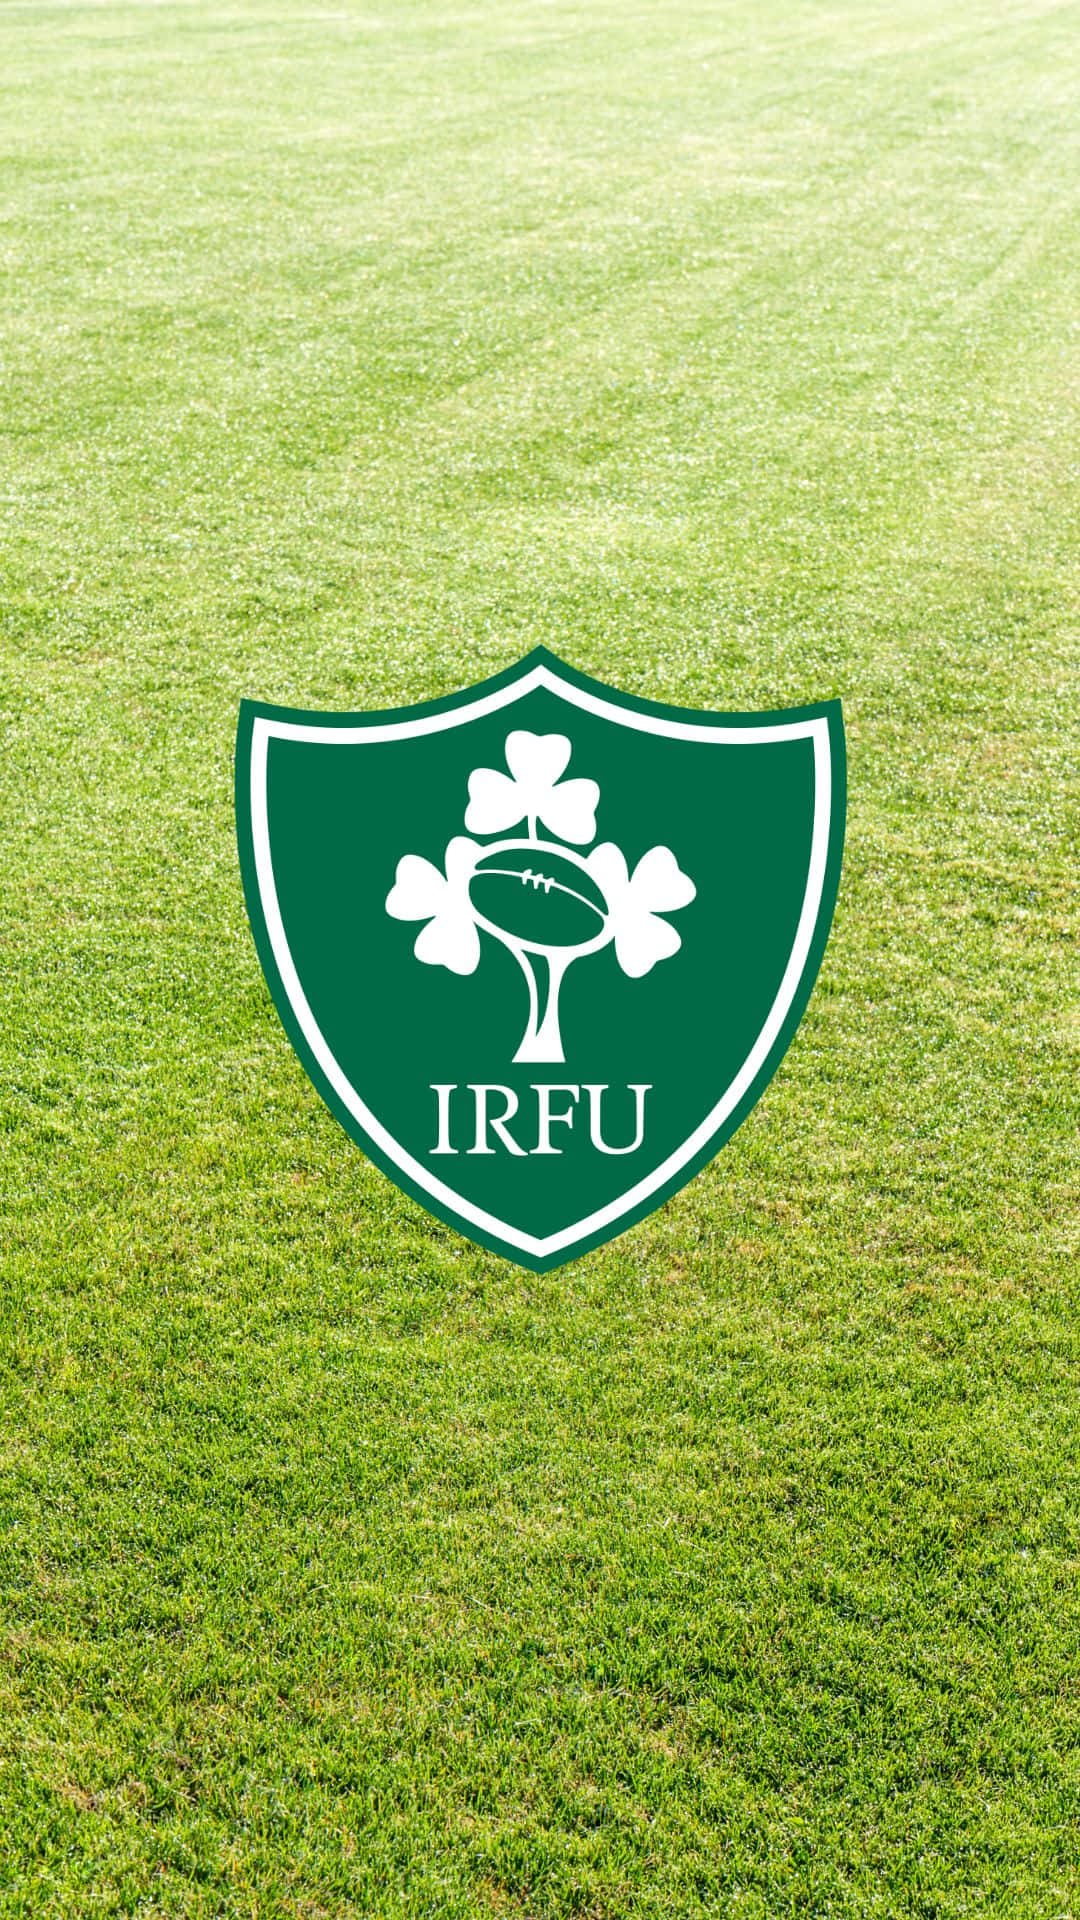 Ireland Rugby Team In Action against their opponent Wallpaper